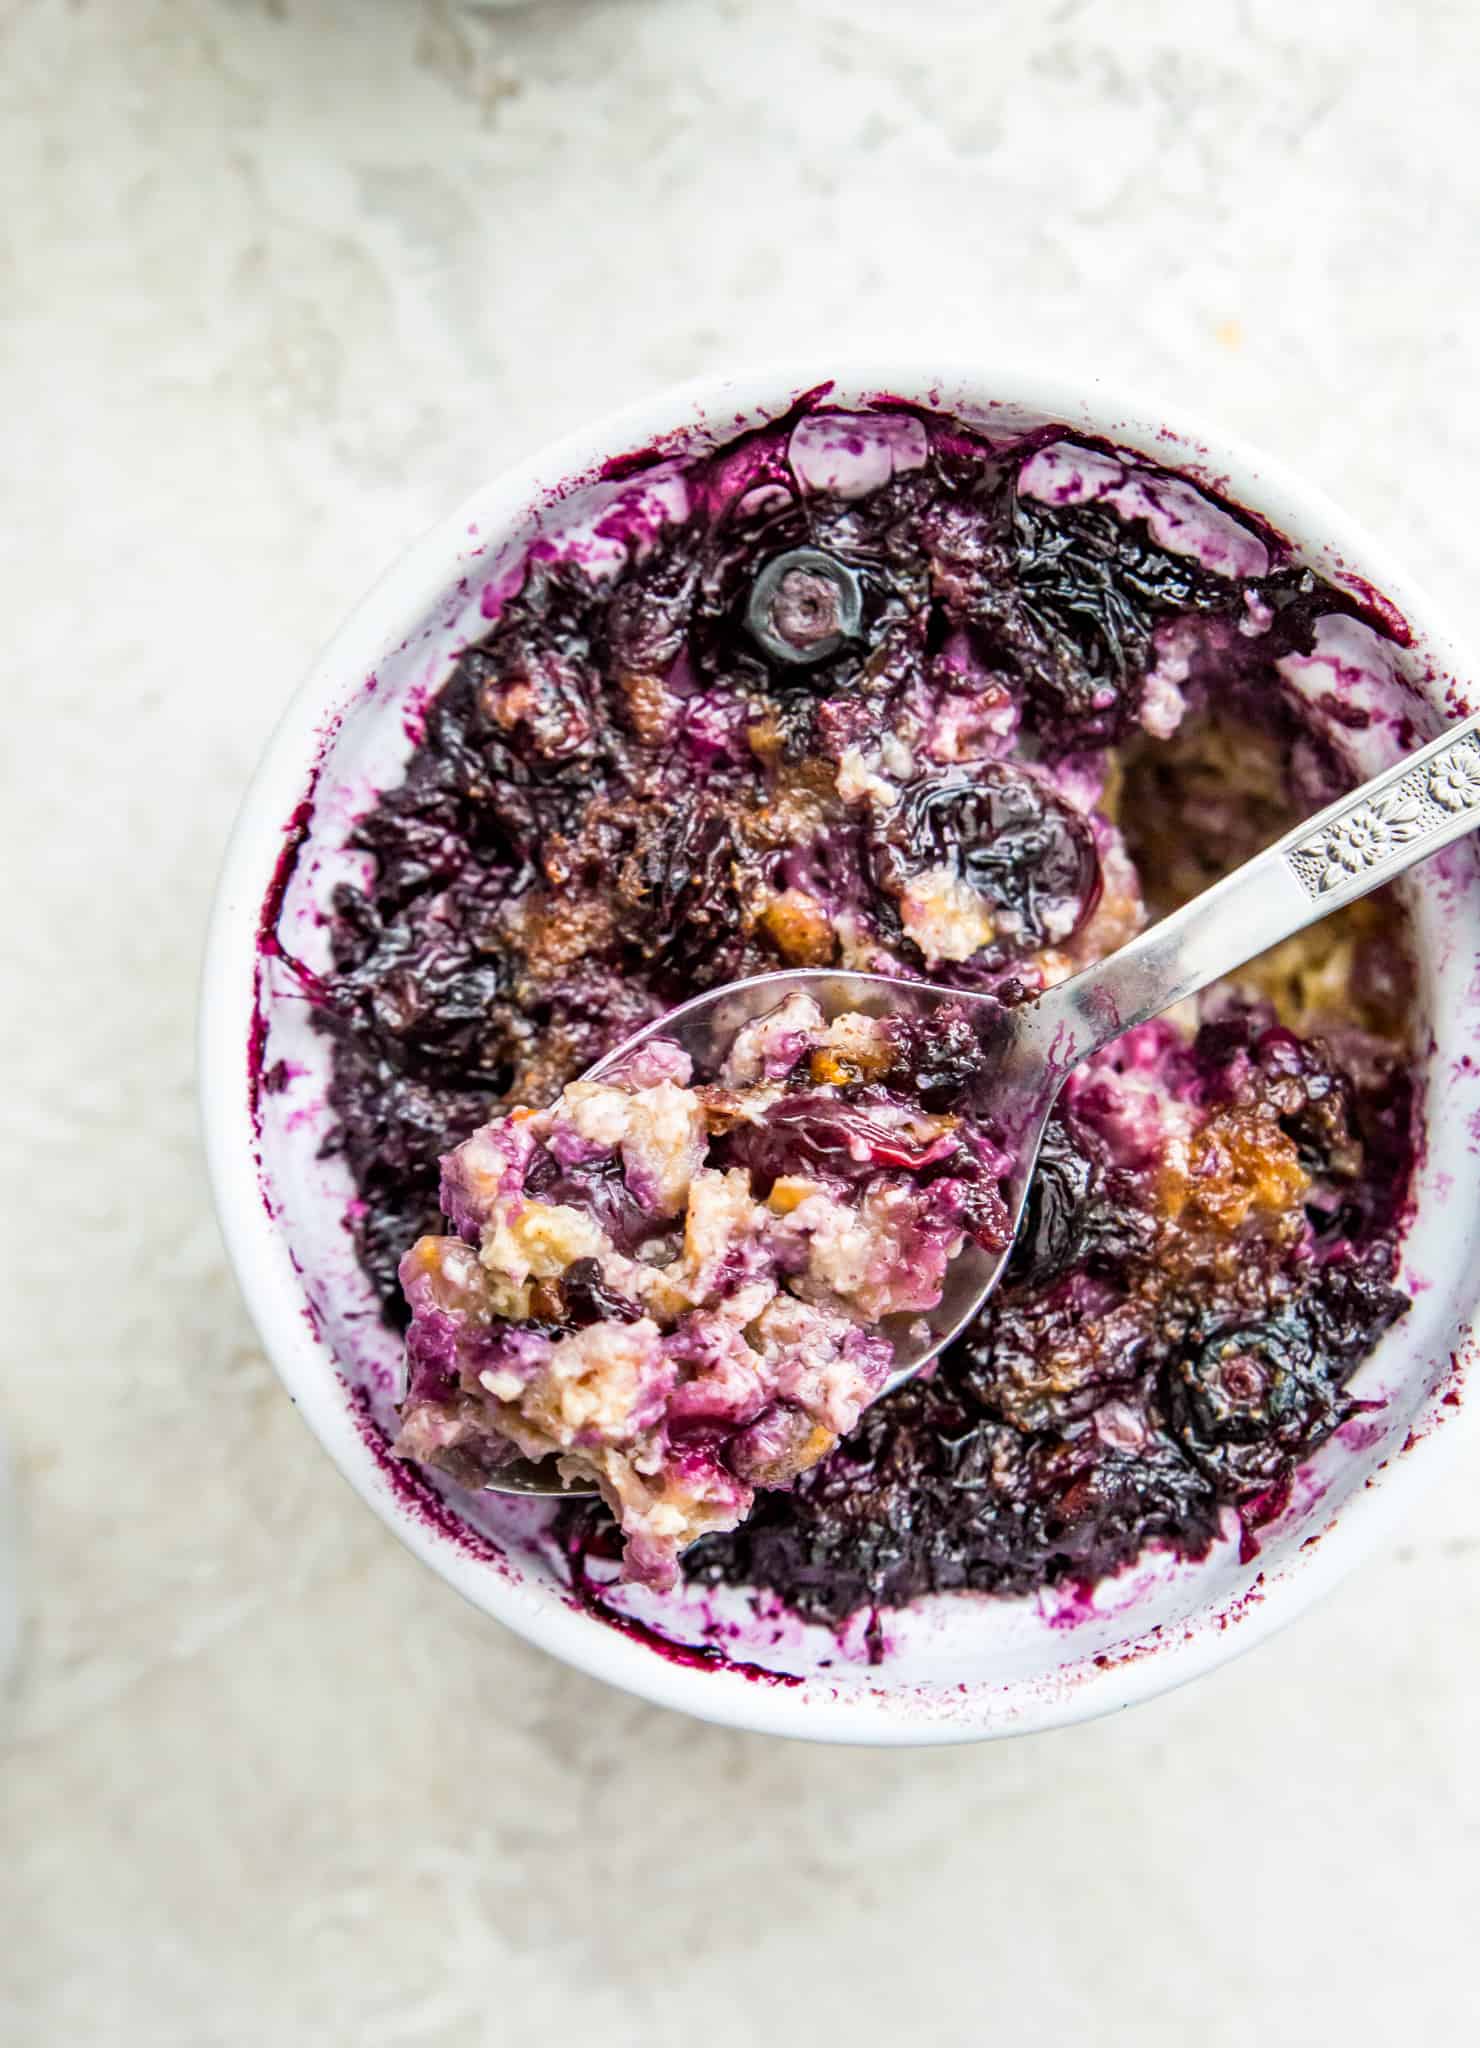 A ramekin filled with baked oatmeal and topped with cooked blueberries.